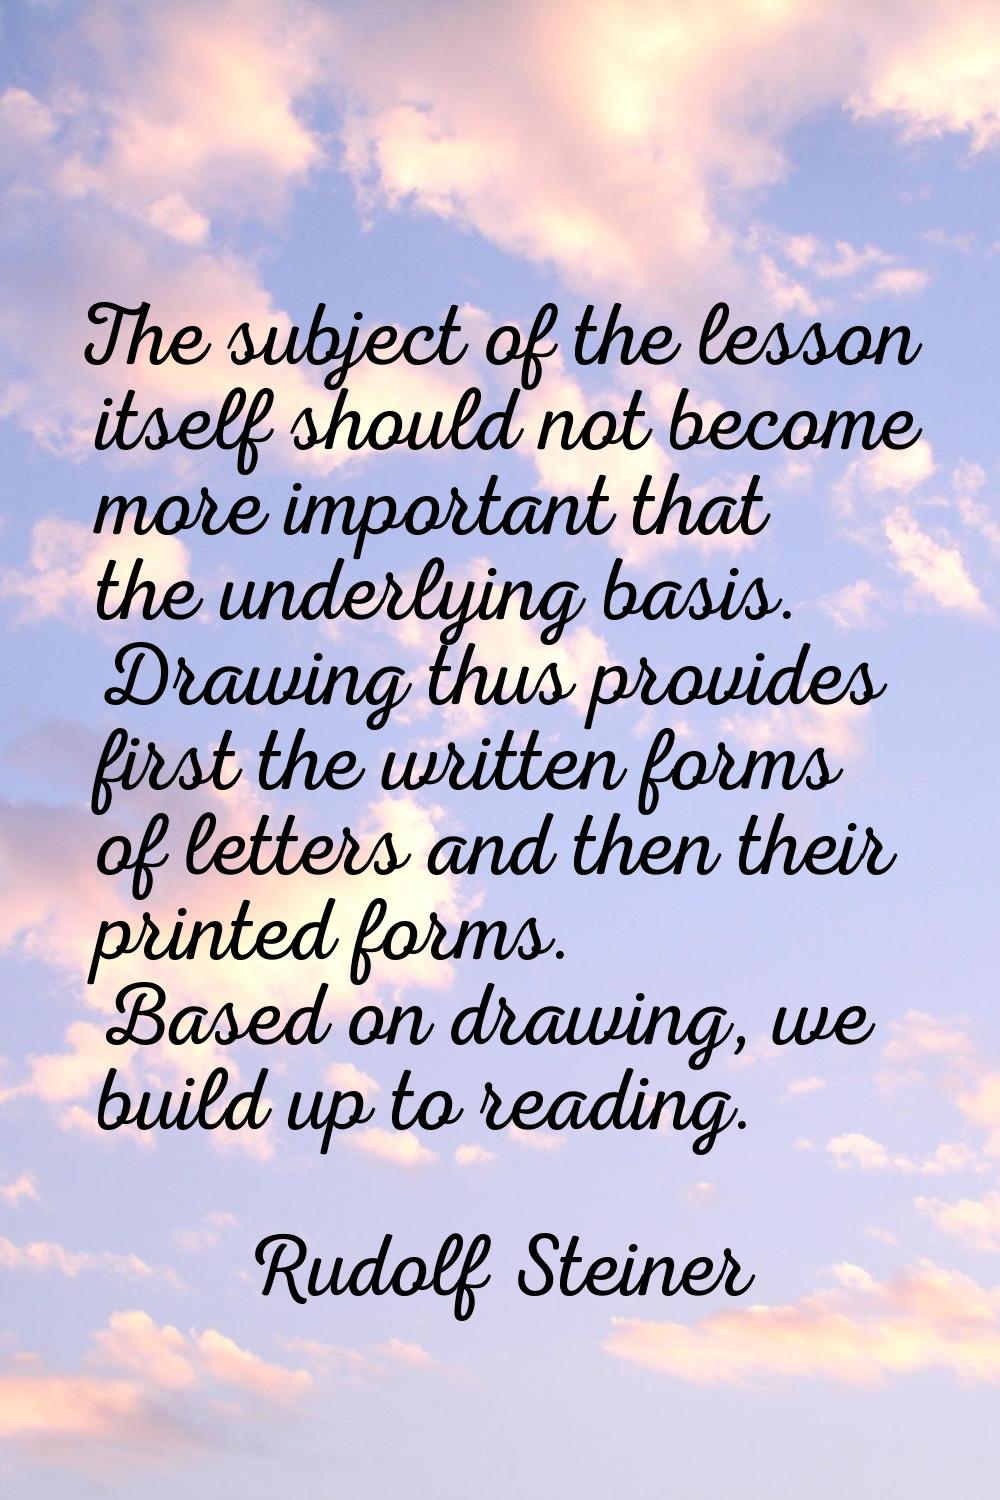 The subject of the lesson itself should not become more important that the underlying basis. Drawin